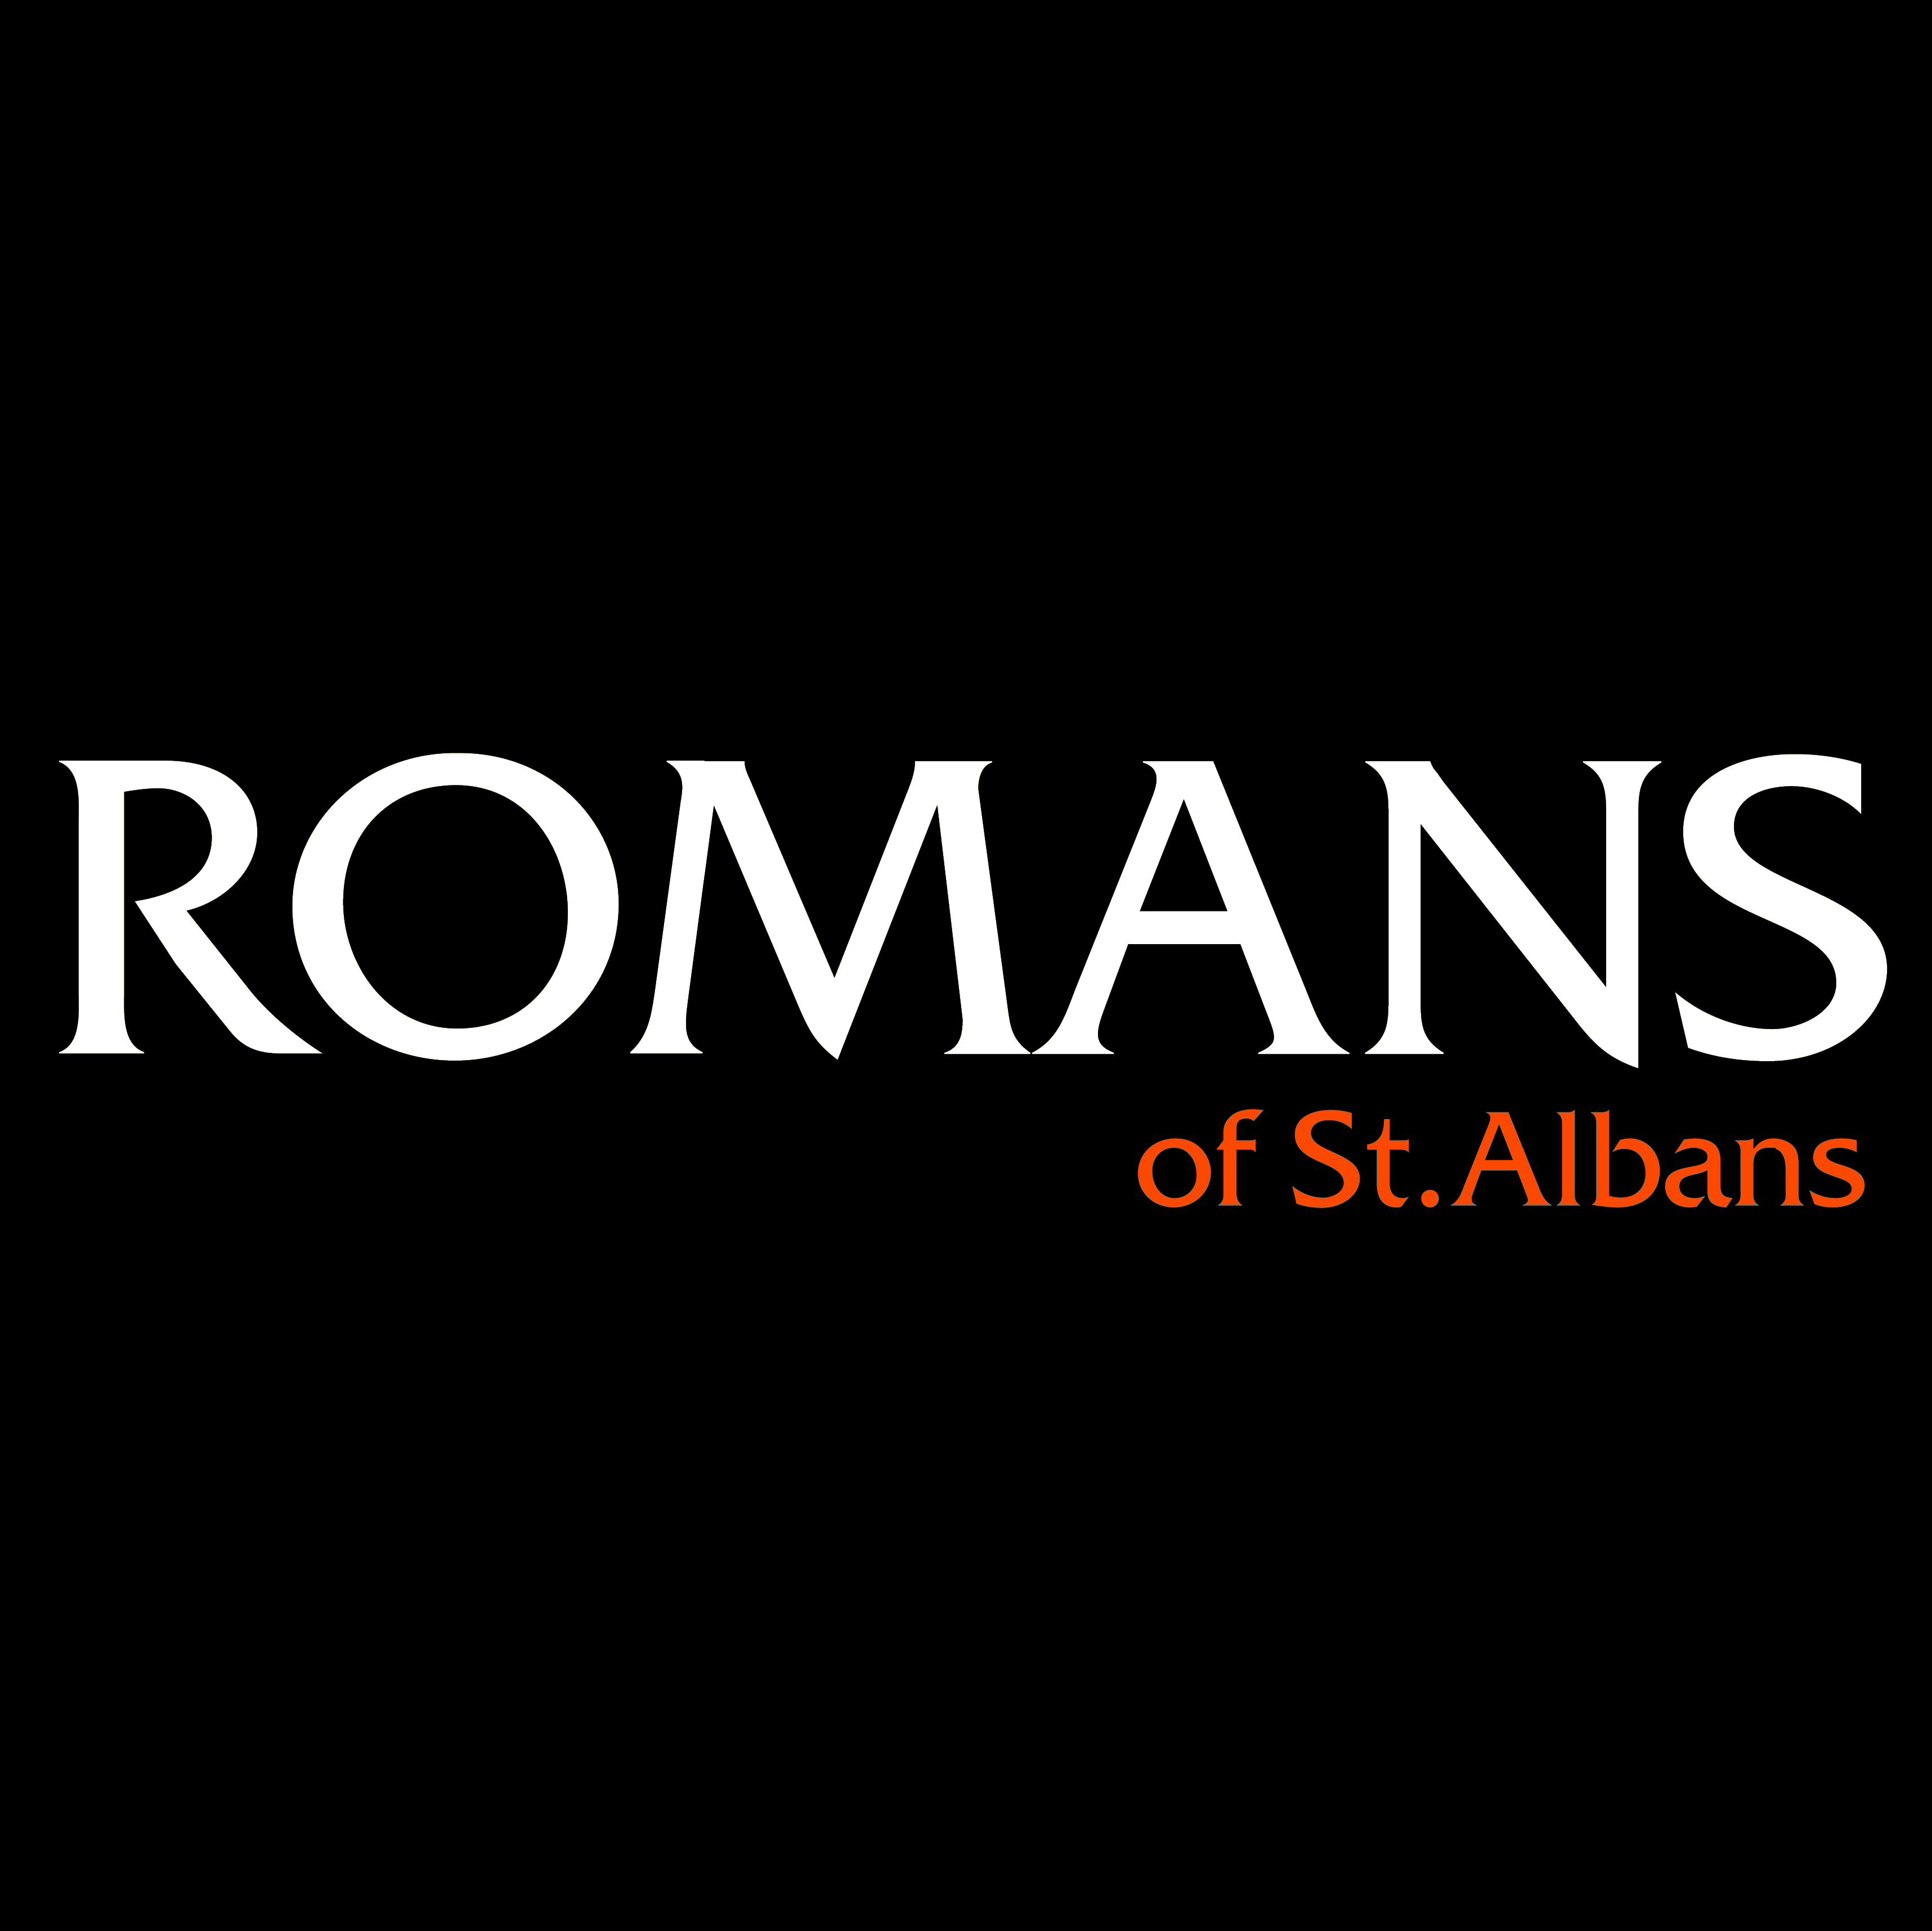 Romans of St.Albans Specialists in Luxury, Sports and 4x4 vehicles. Hertfordshires premier dream car showroom